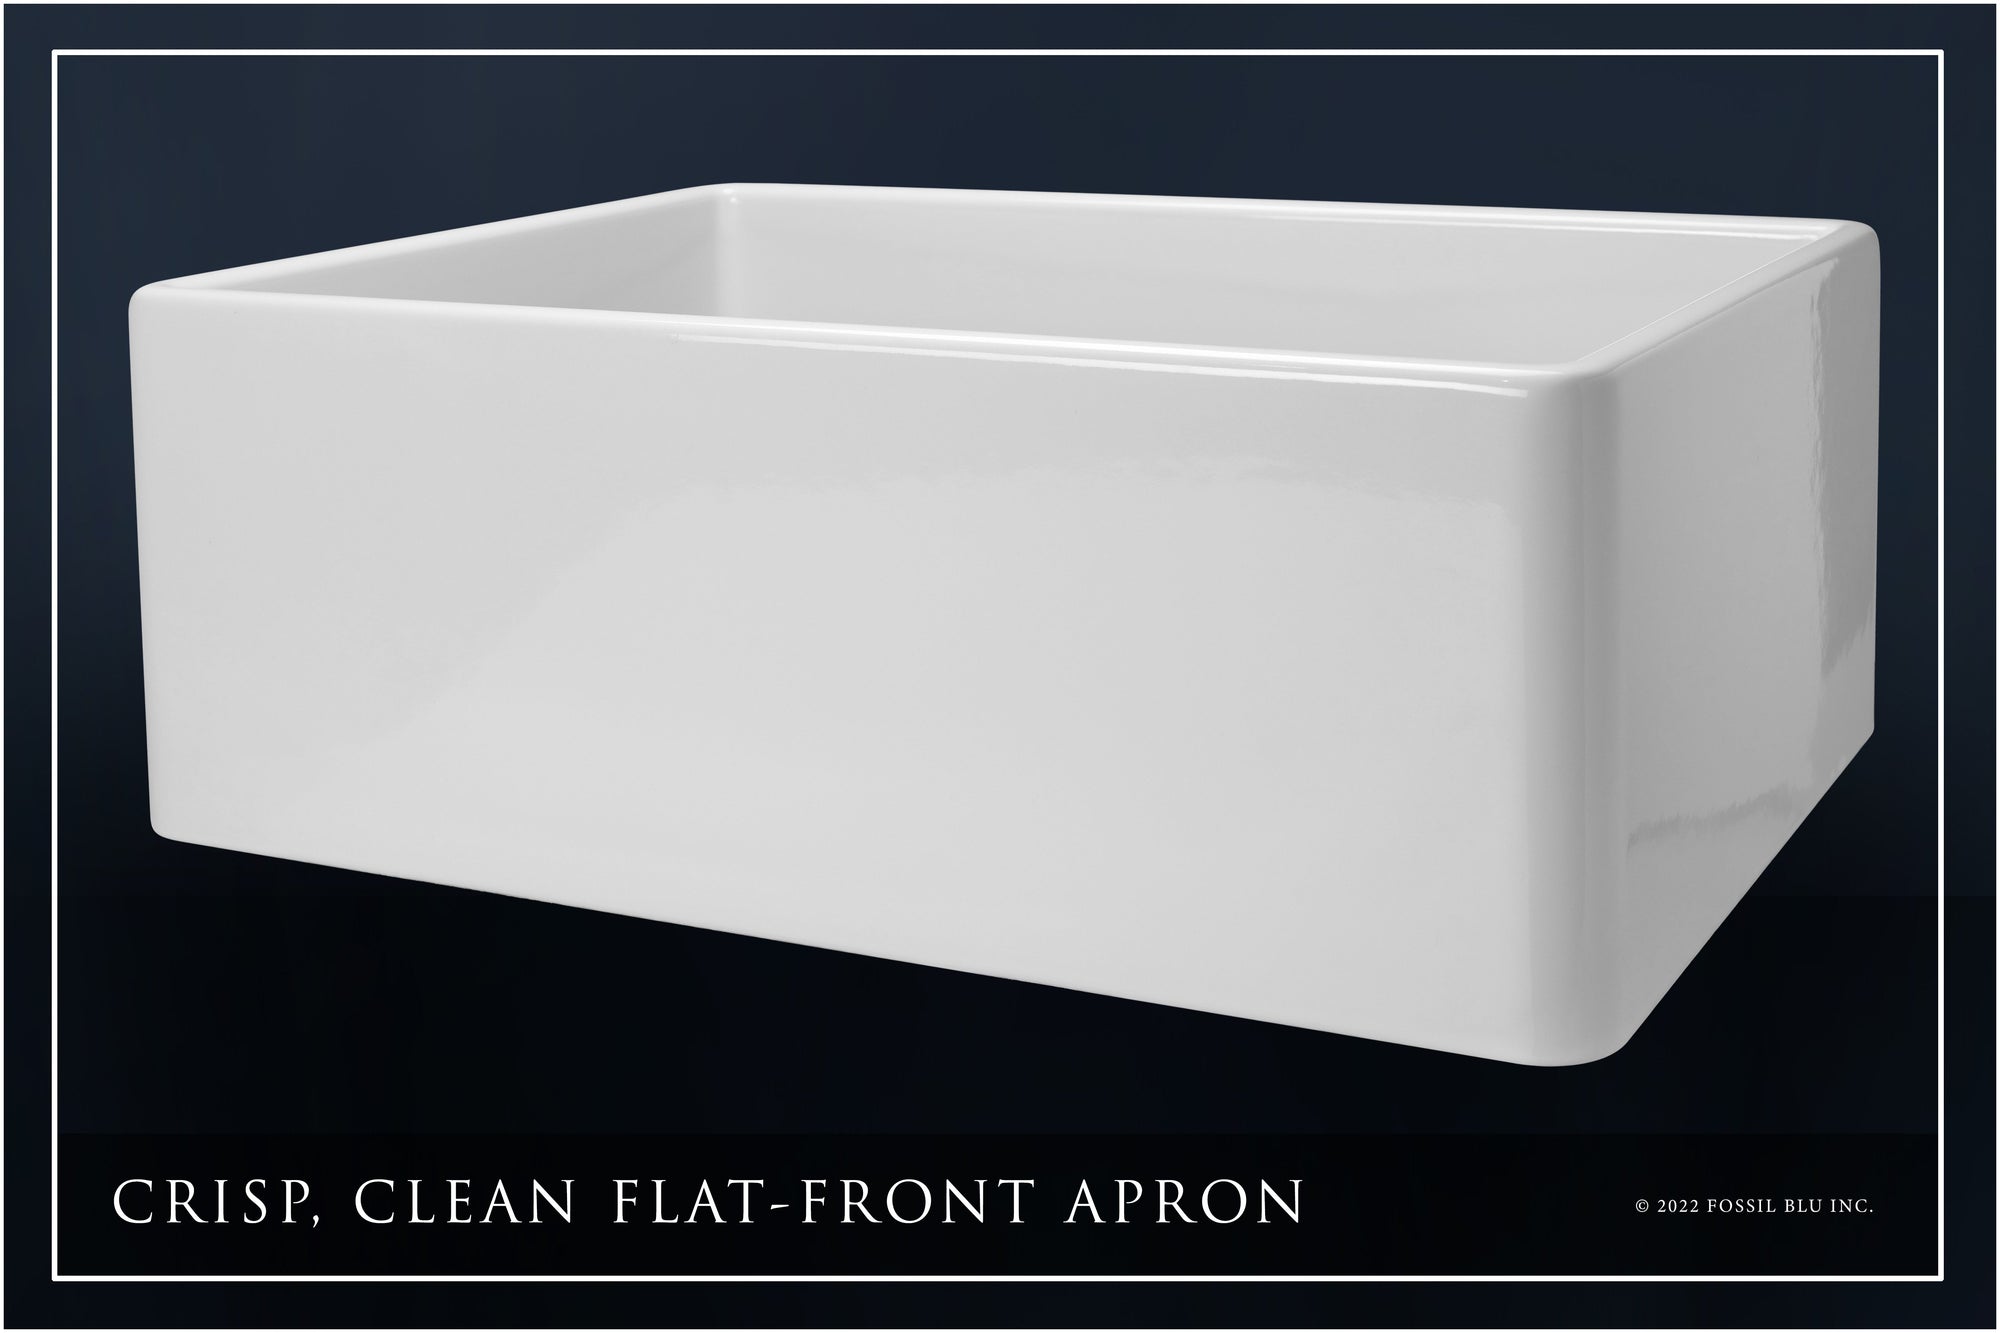 FSW1000MB LUXURY 26-INCH SOLID FIRECLAY FARMHOUSE SINK IN WHITE, MATTE BLACK ACCS, FLAT FRONT